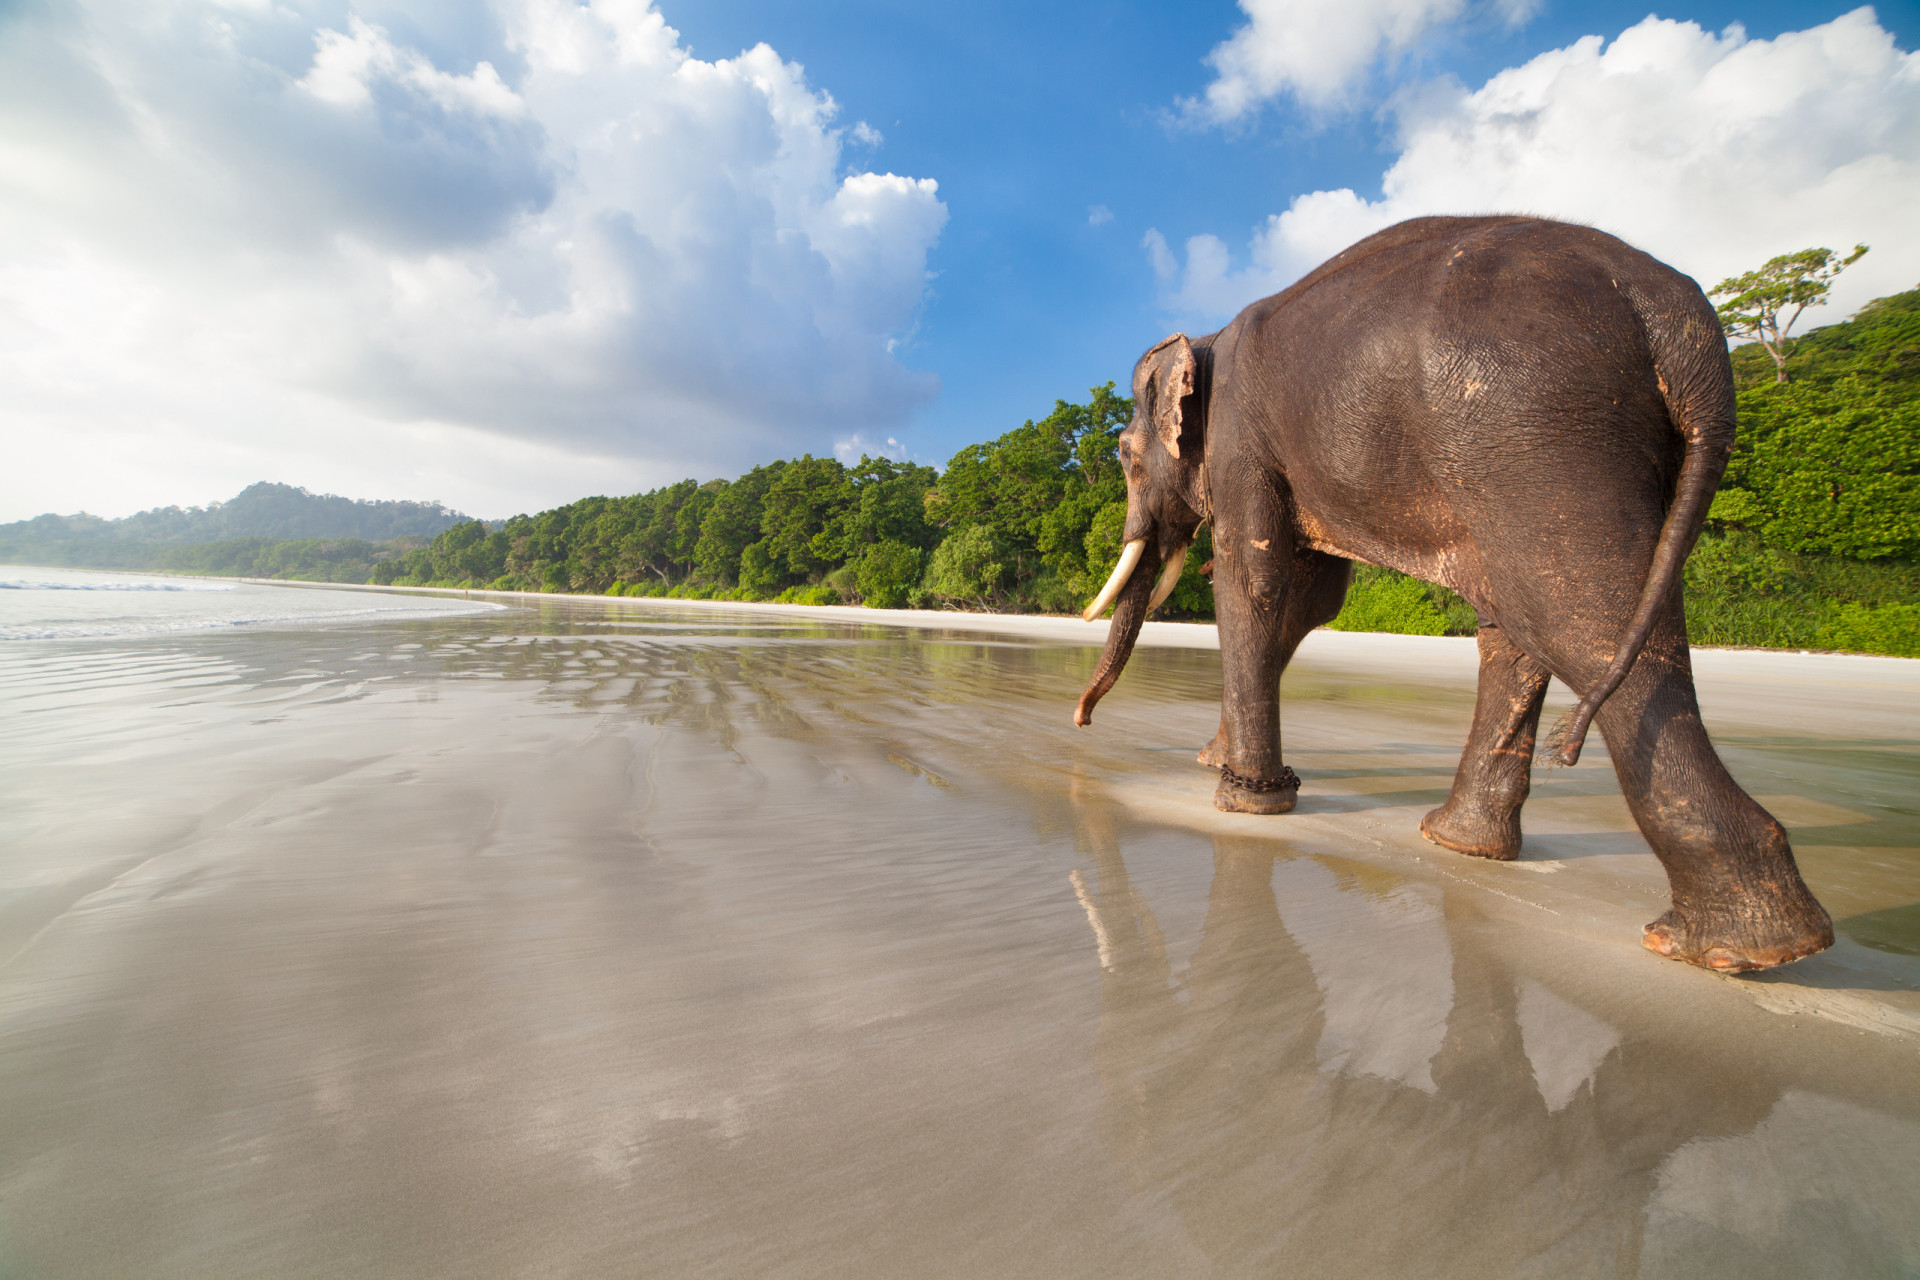 <p>Interview Island is one of the Andaman Islands. It has about 80-90 feral elephants, which were brought for forestry works. Elephants also roam the beaches of Swaraj Dweep.</p><p><a href="https://www.msn.com/en-nz/community/channel/vid-7xx8mnucu55yw63we9va2gwr7uihbxwc68fxqp25x6tg4ftibpra?cvid=94631541bc0f4f89bfd59158d696ad7e">Follow us and access great exclusive content every day</a></p>